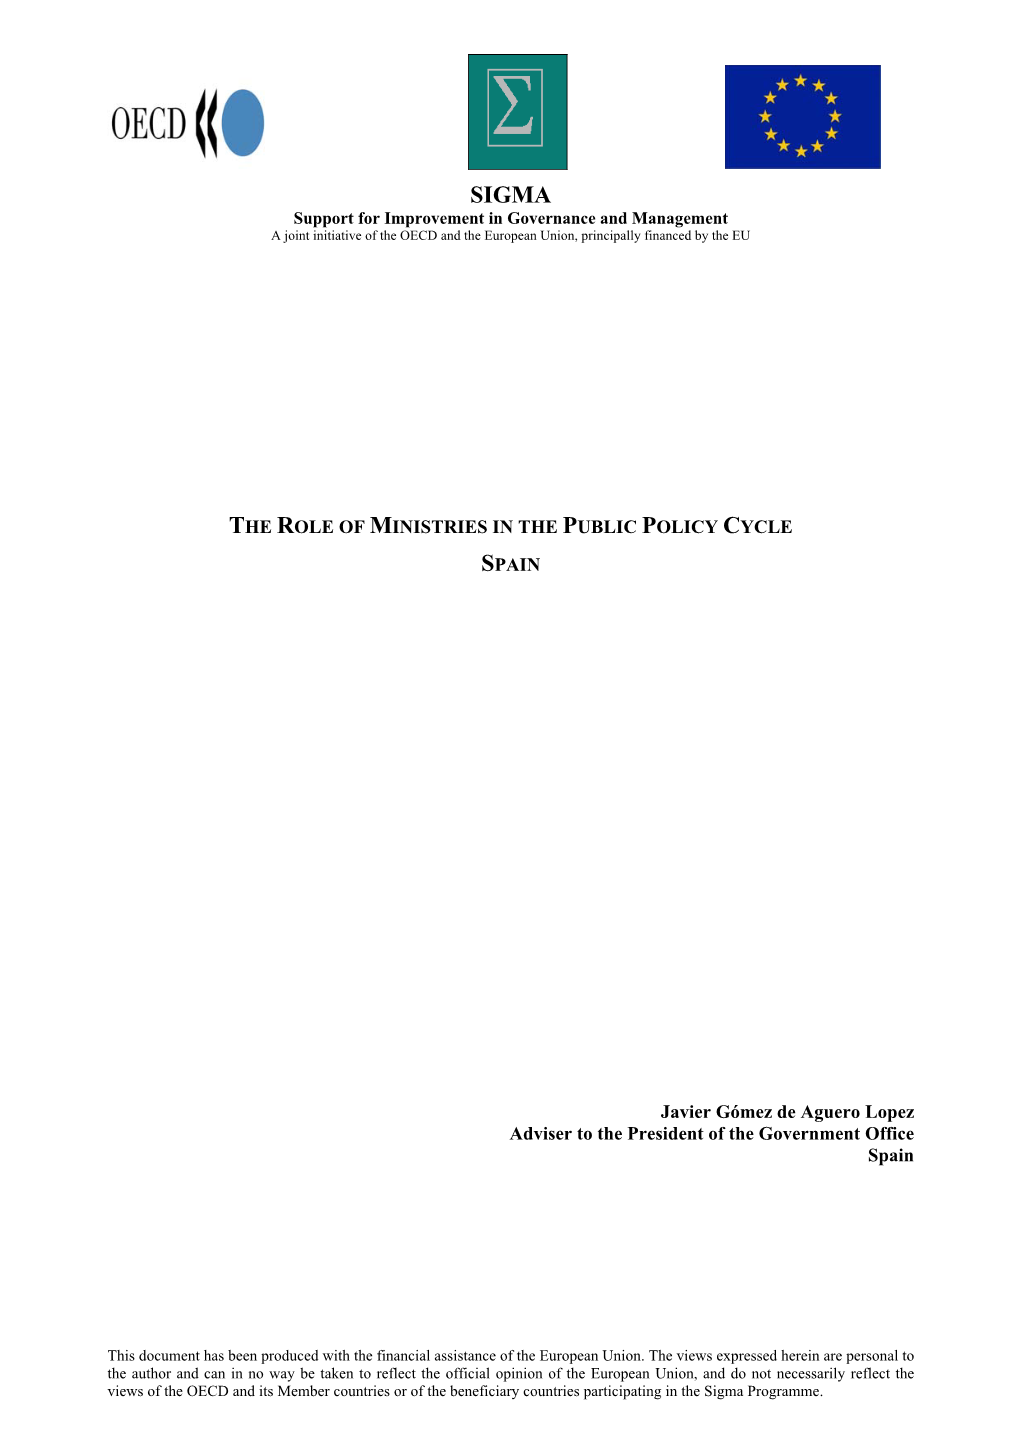 Paper on the Ministries in the Cycle of Public Policy